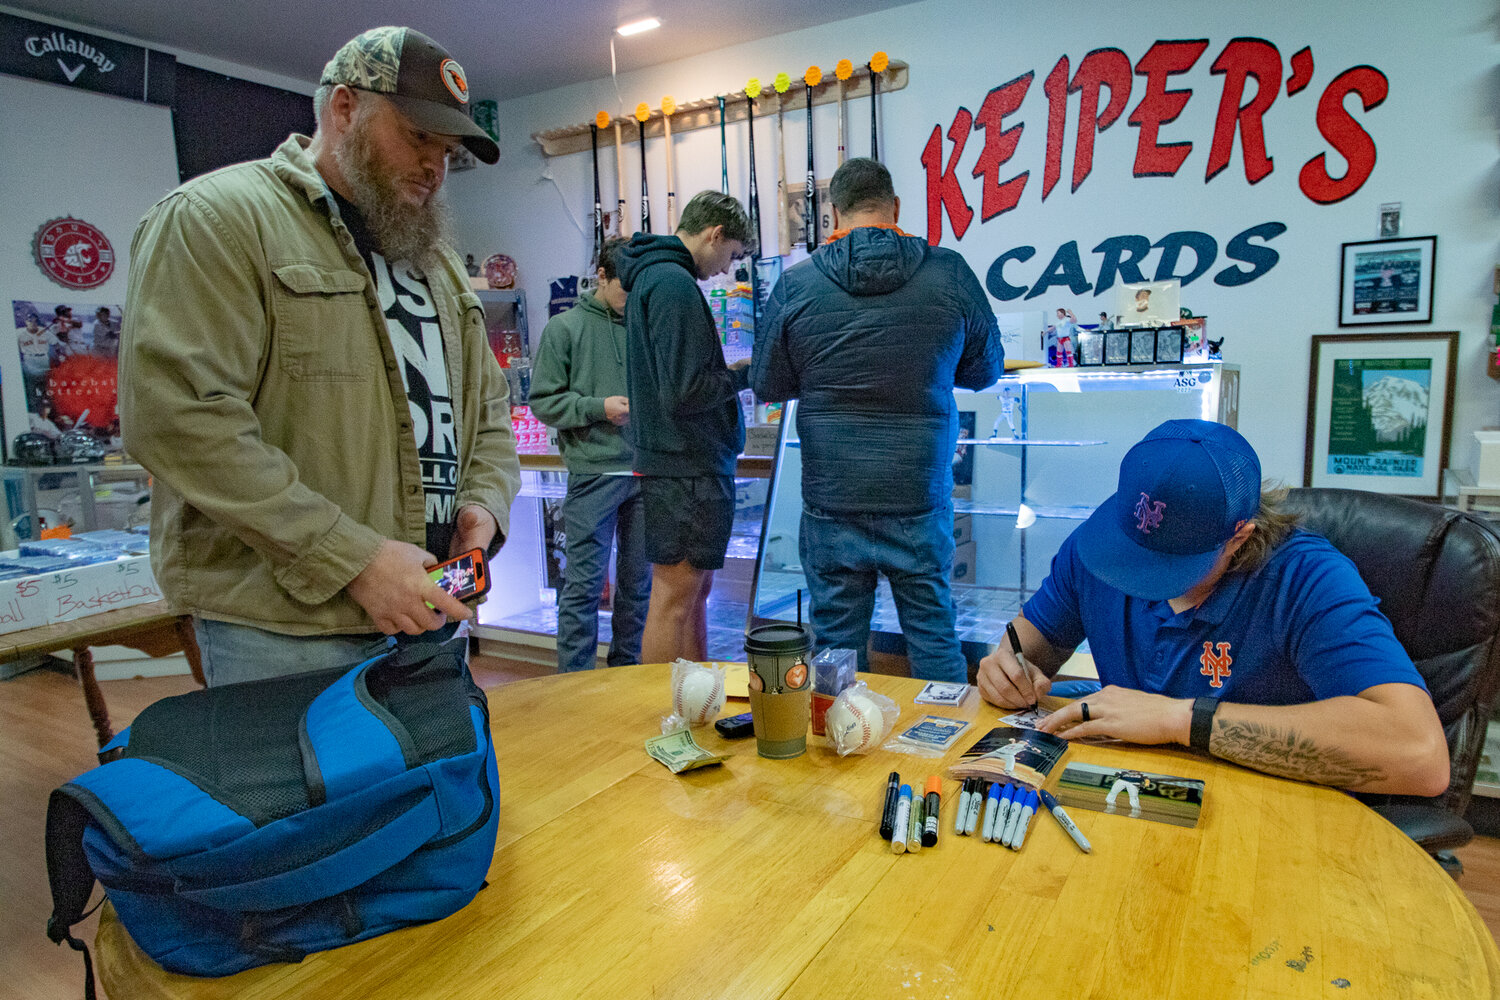 New York Mets prospect and W.F. West High School pitching star Dakota Hawkins signs an autograph for a local fan during at Keiper's Cards on Saturday, Dec. 2, during a card and memorabilia show in downtown Centralia.